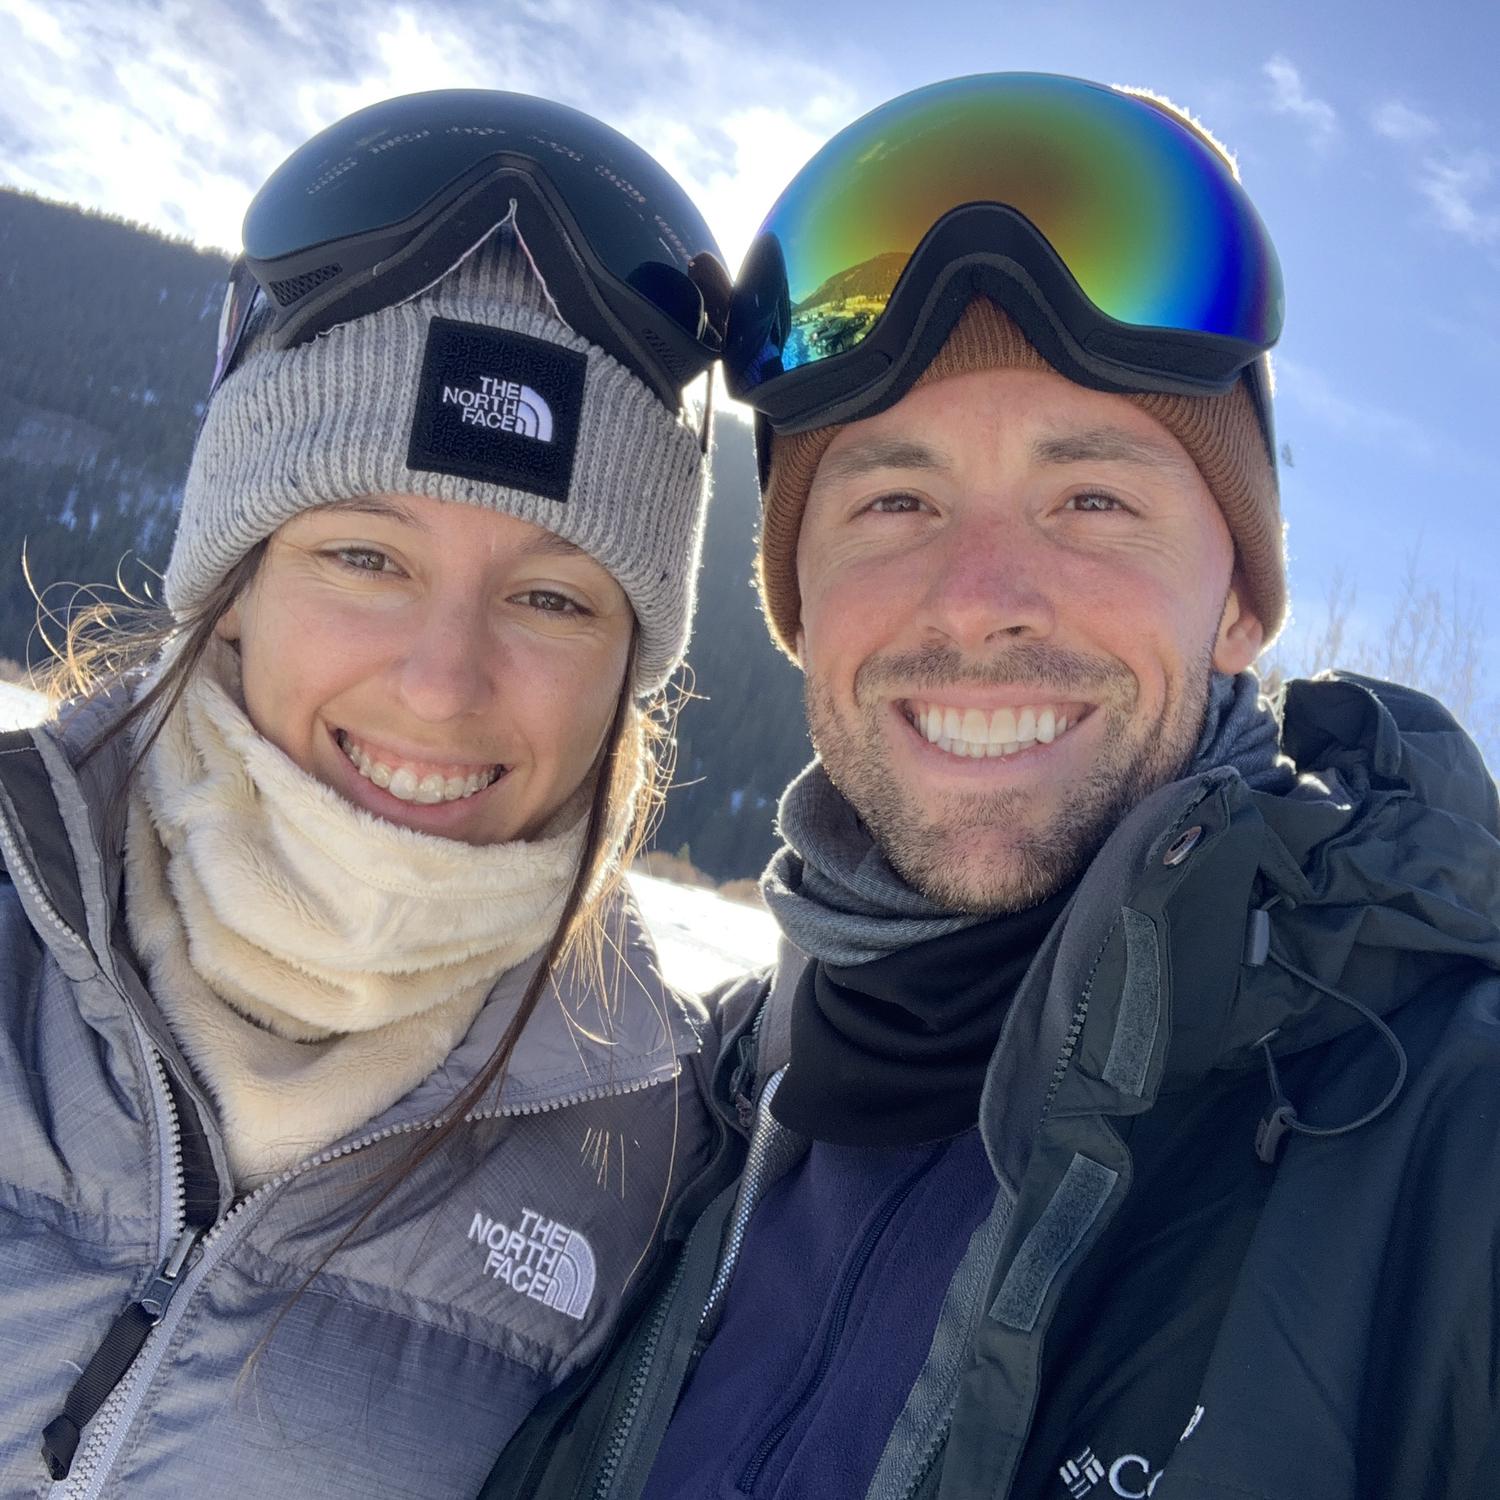 Our first trip snowboarding together in Breckenridge, Colorado!